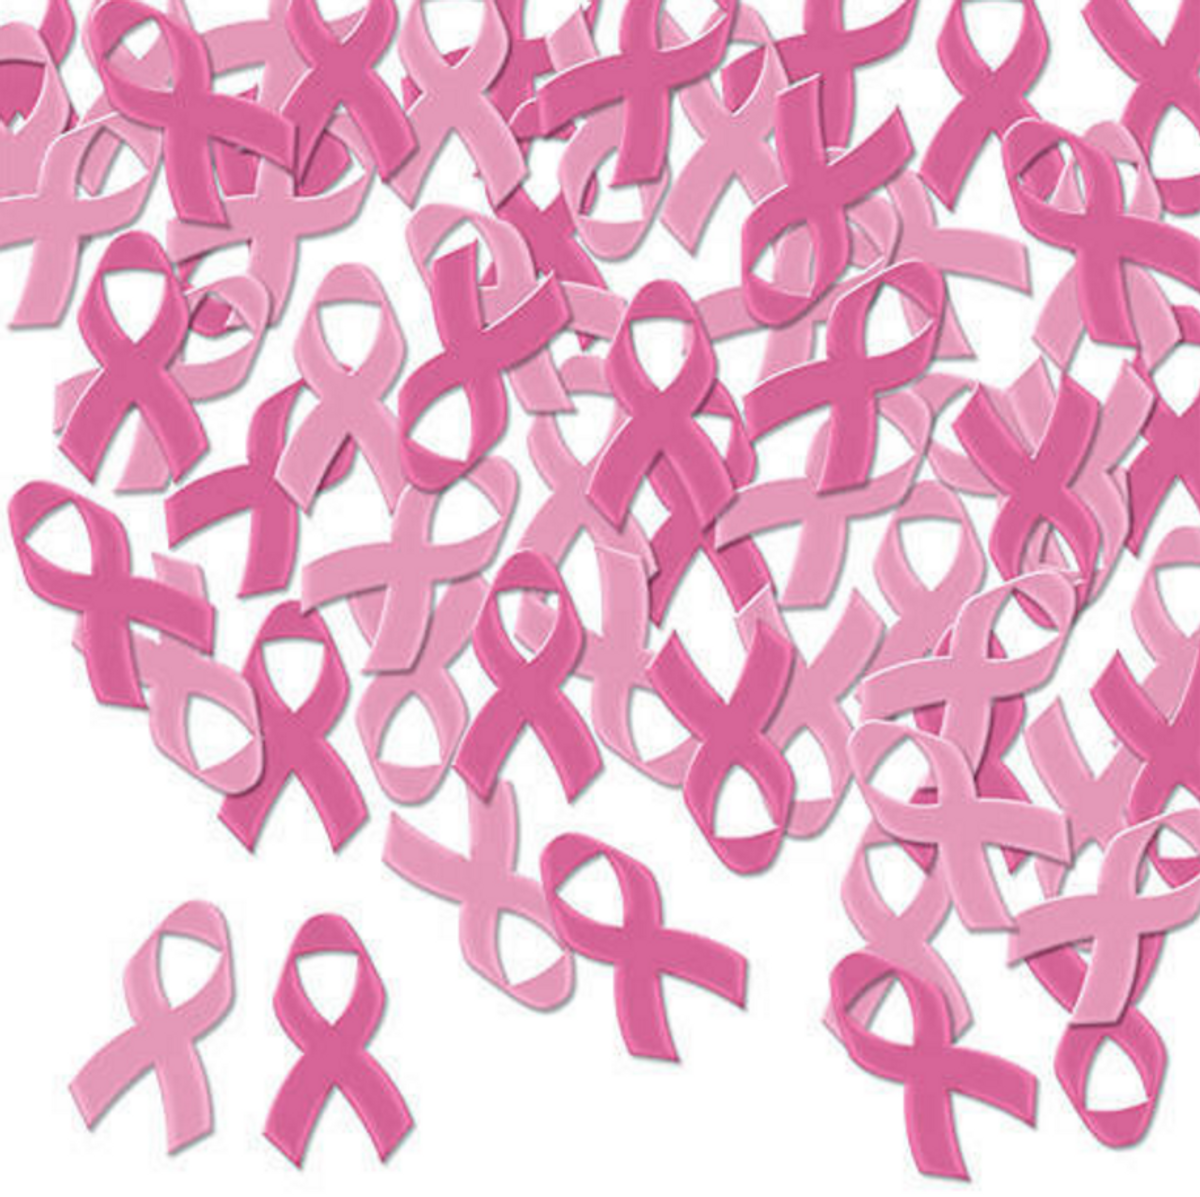 The Disease Behind the Pink Ribbons